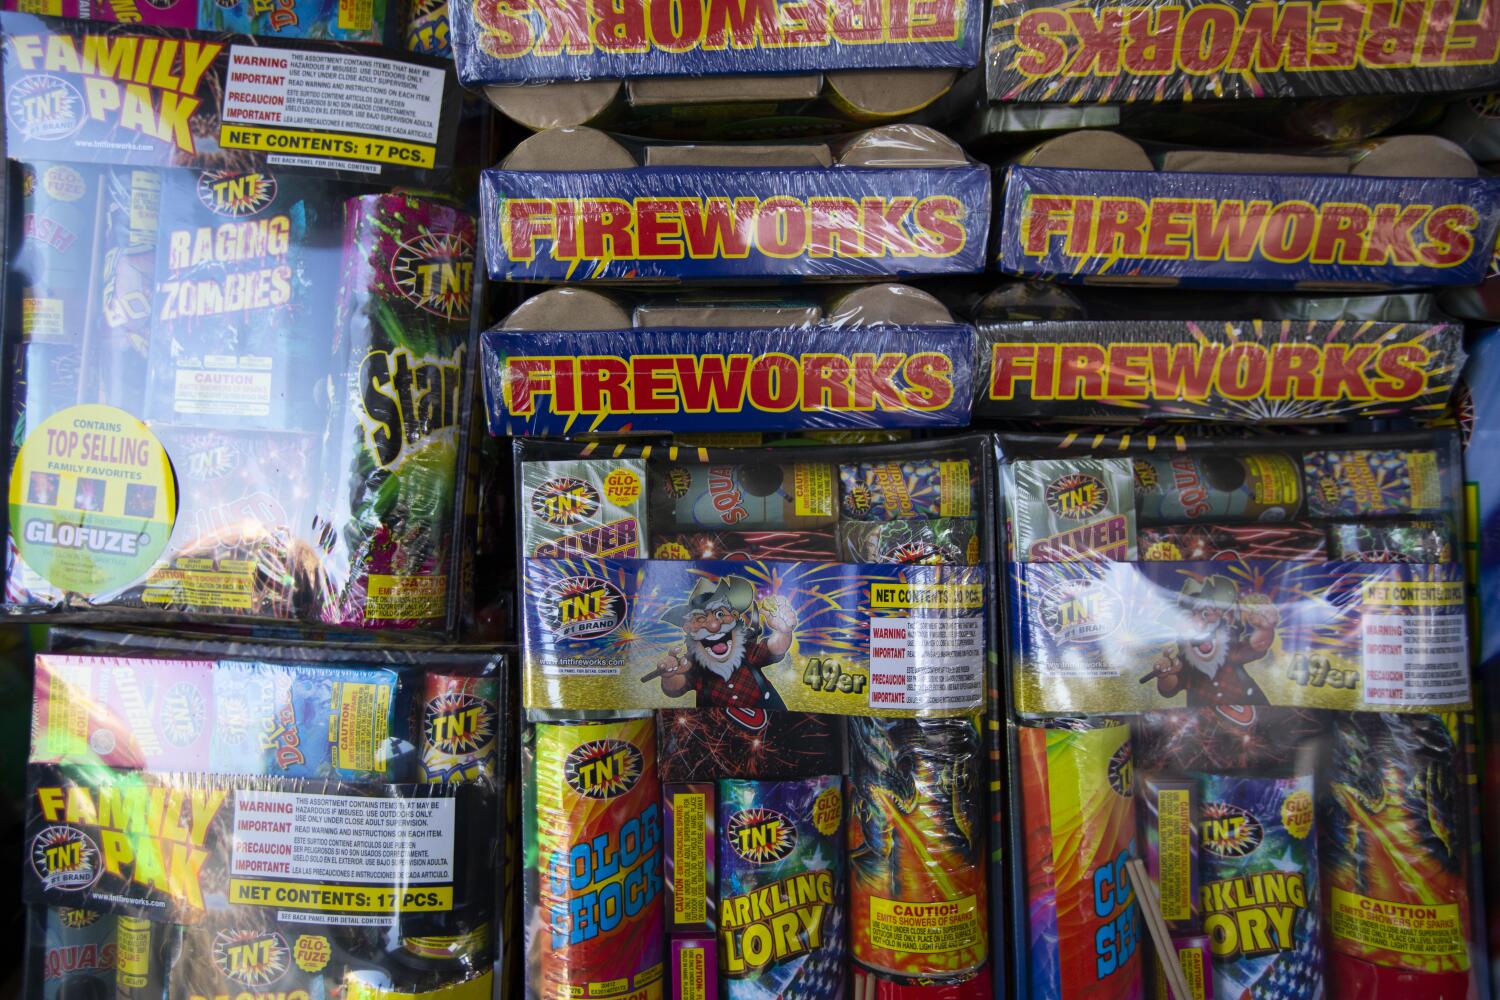 LAPD calls in bomb squad for one of the most massive fireworks busts in state history